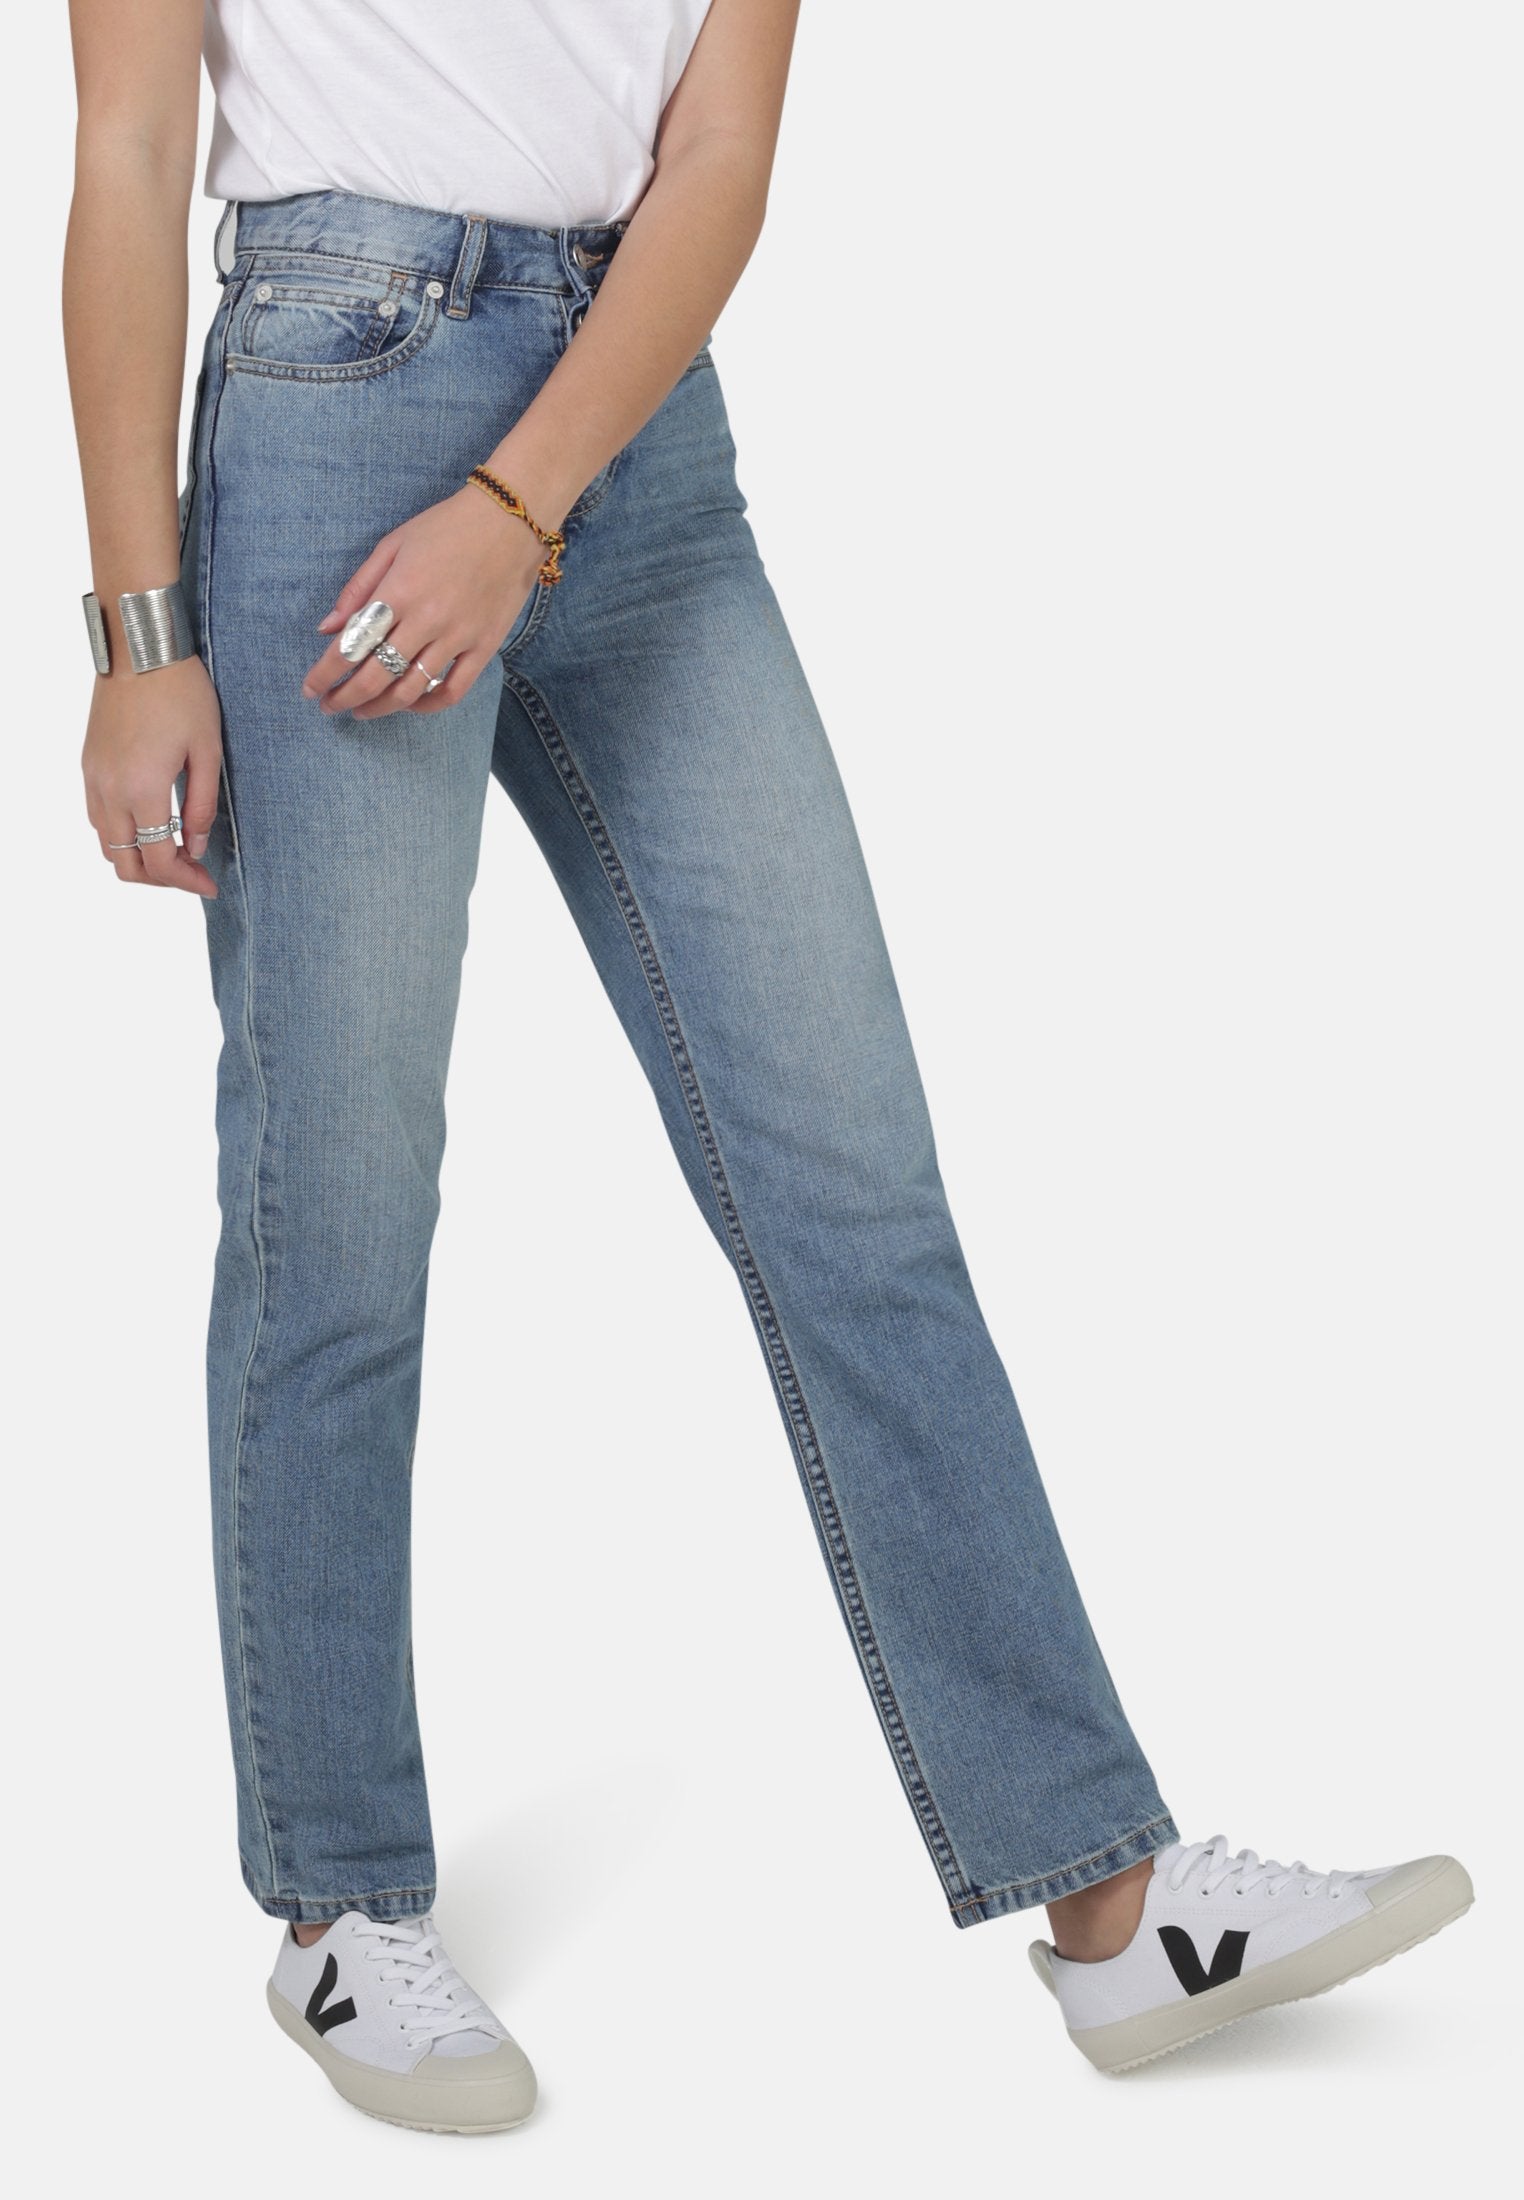 Libby Straight Jean in Light Wash